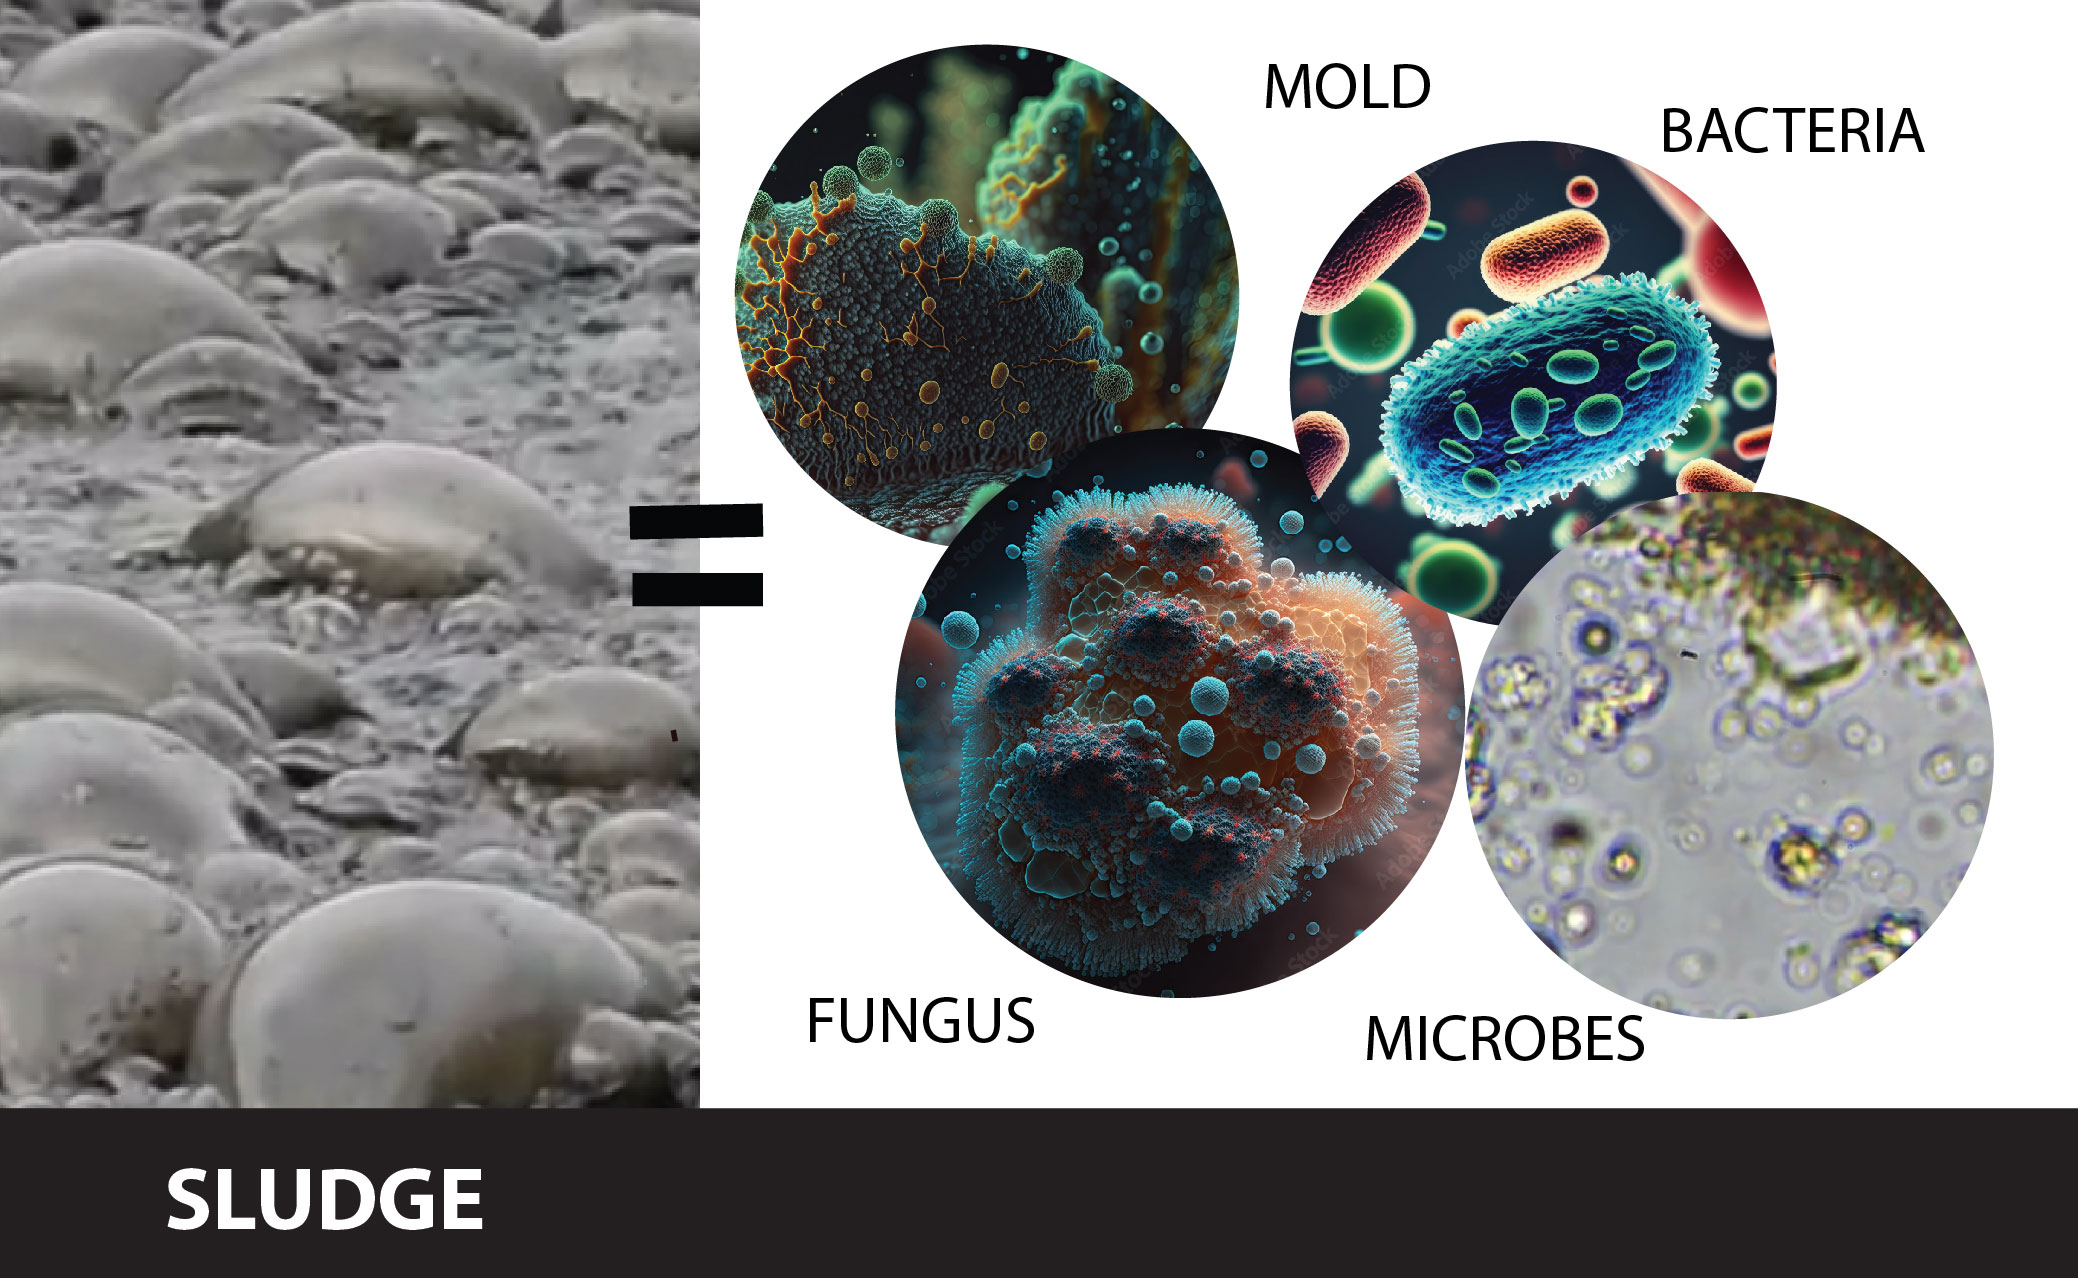 Diesel sludge shown with components mold, bacteria, fungus, and microbes